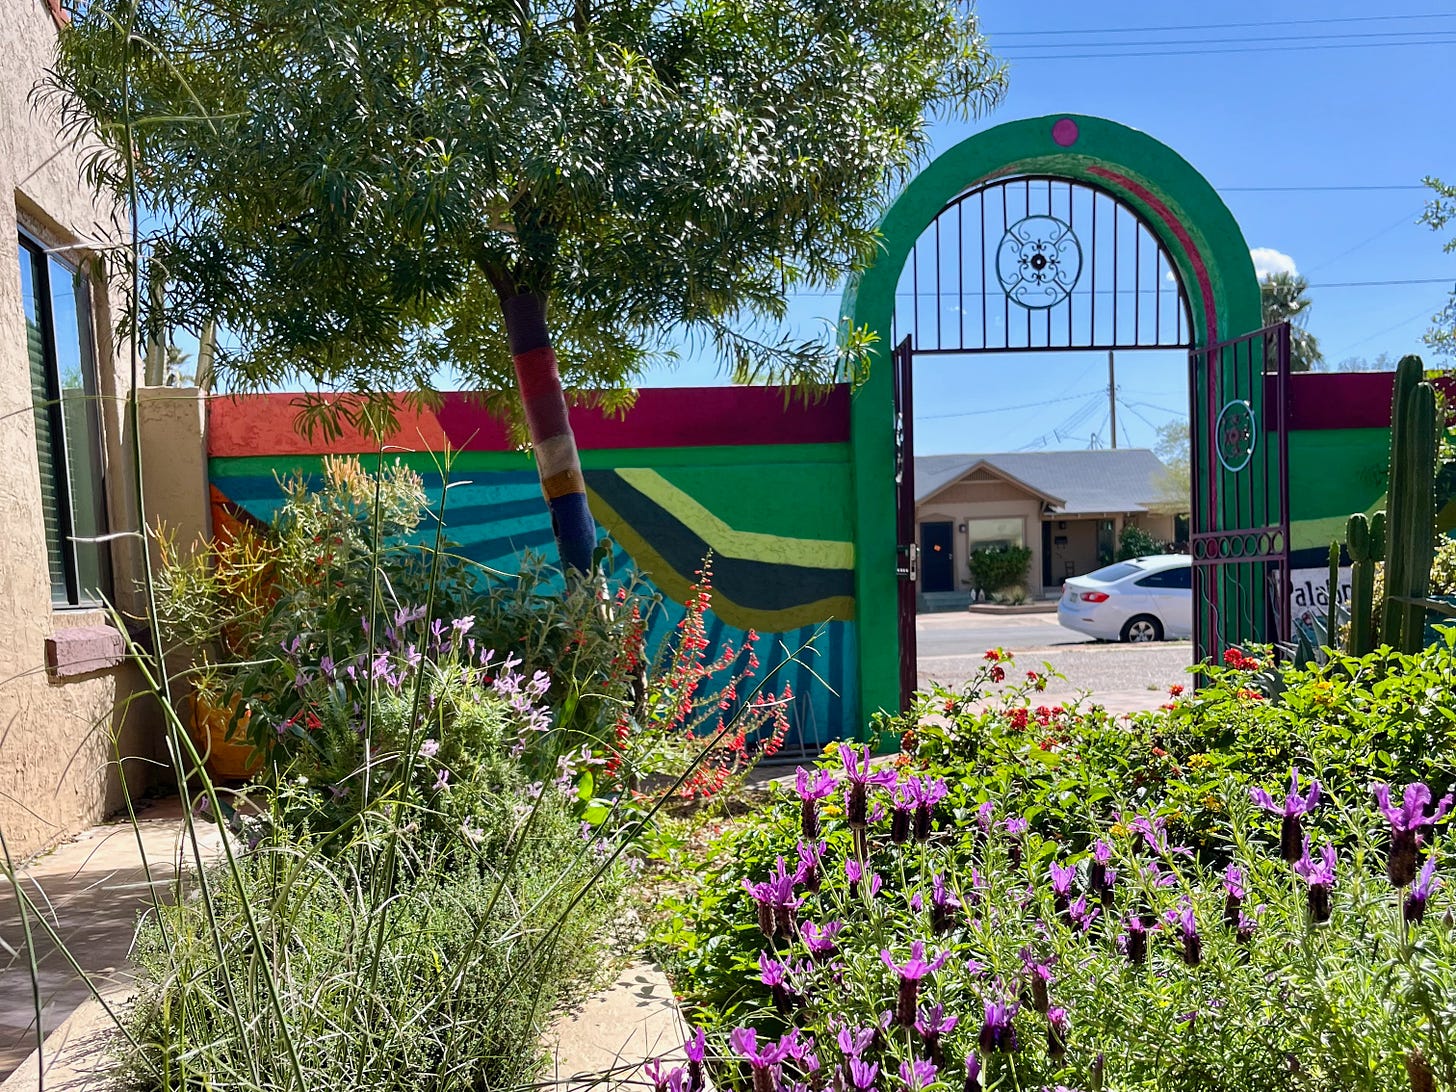 The courtyard at Nurture House in Phoenix in bloom: purple and red flowers, greenery, and cactus. The painted archway in the background.